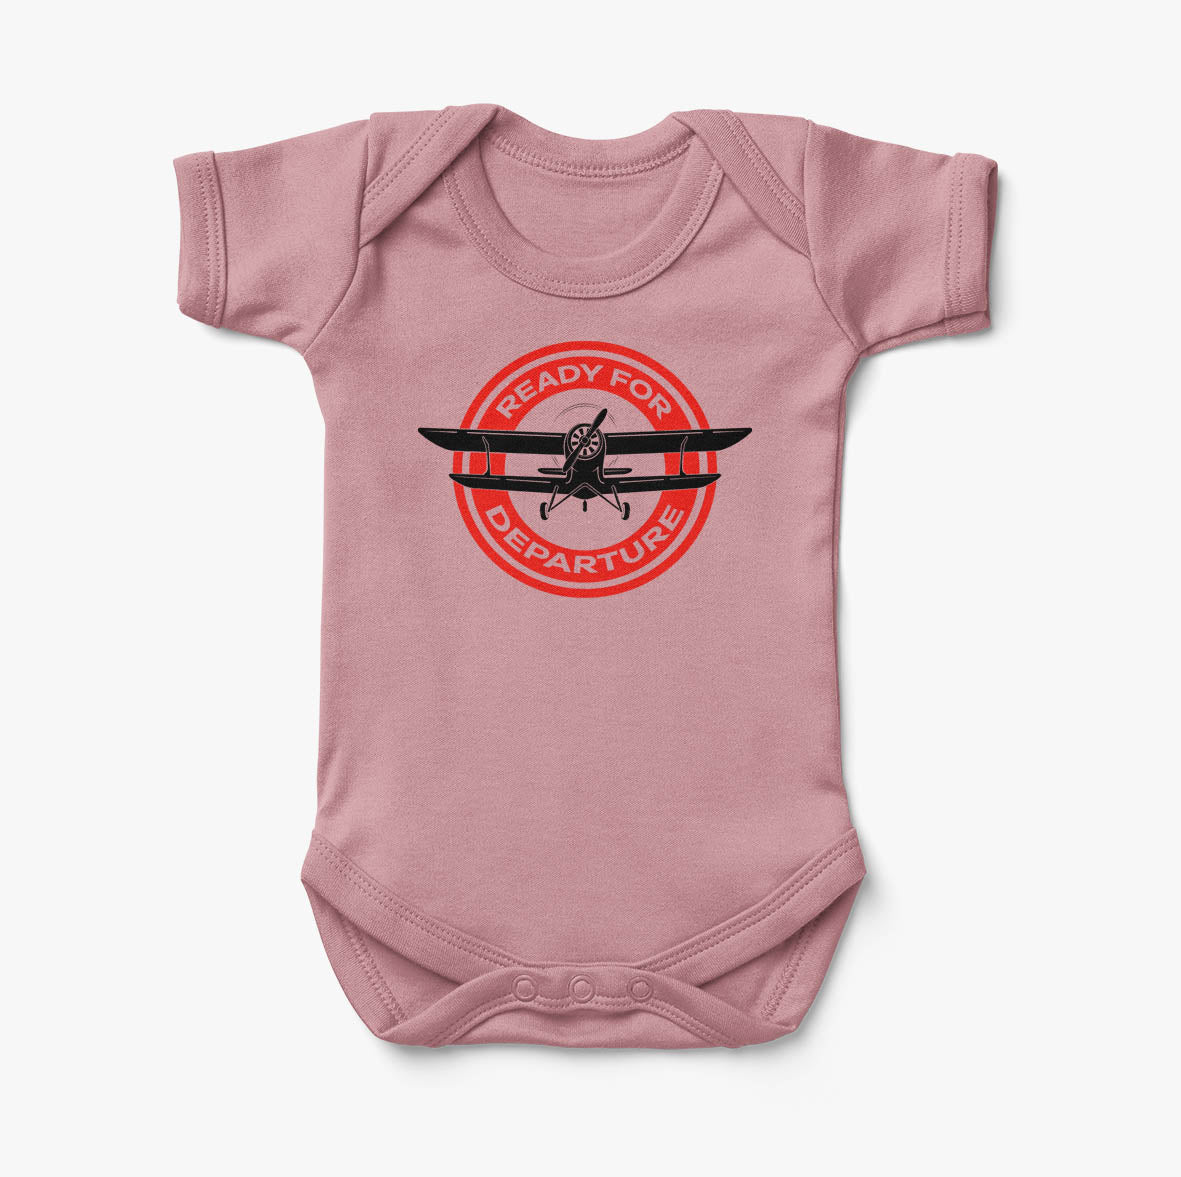 Ready for Departure Designed Baby Bodysuits